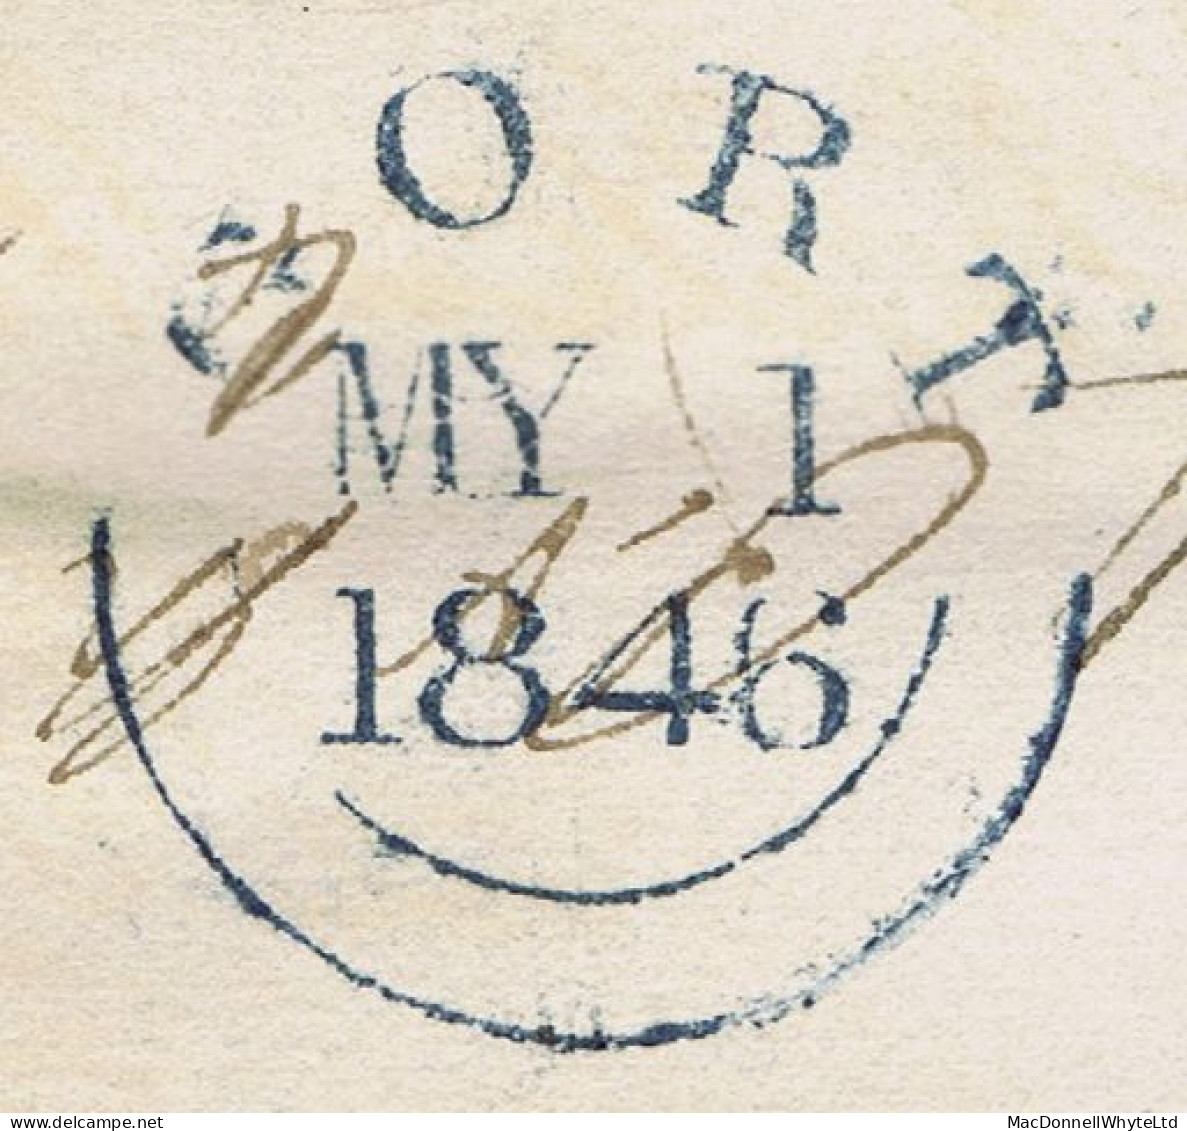 Ireland Galway Uniform Penny Post 1846 Cover To Military Dept London Boxed 2-line PAID AT GORT In Blue, GORT MY 1 1846 - Prephilately